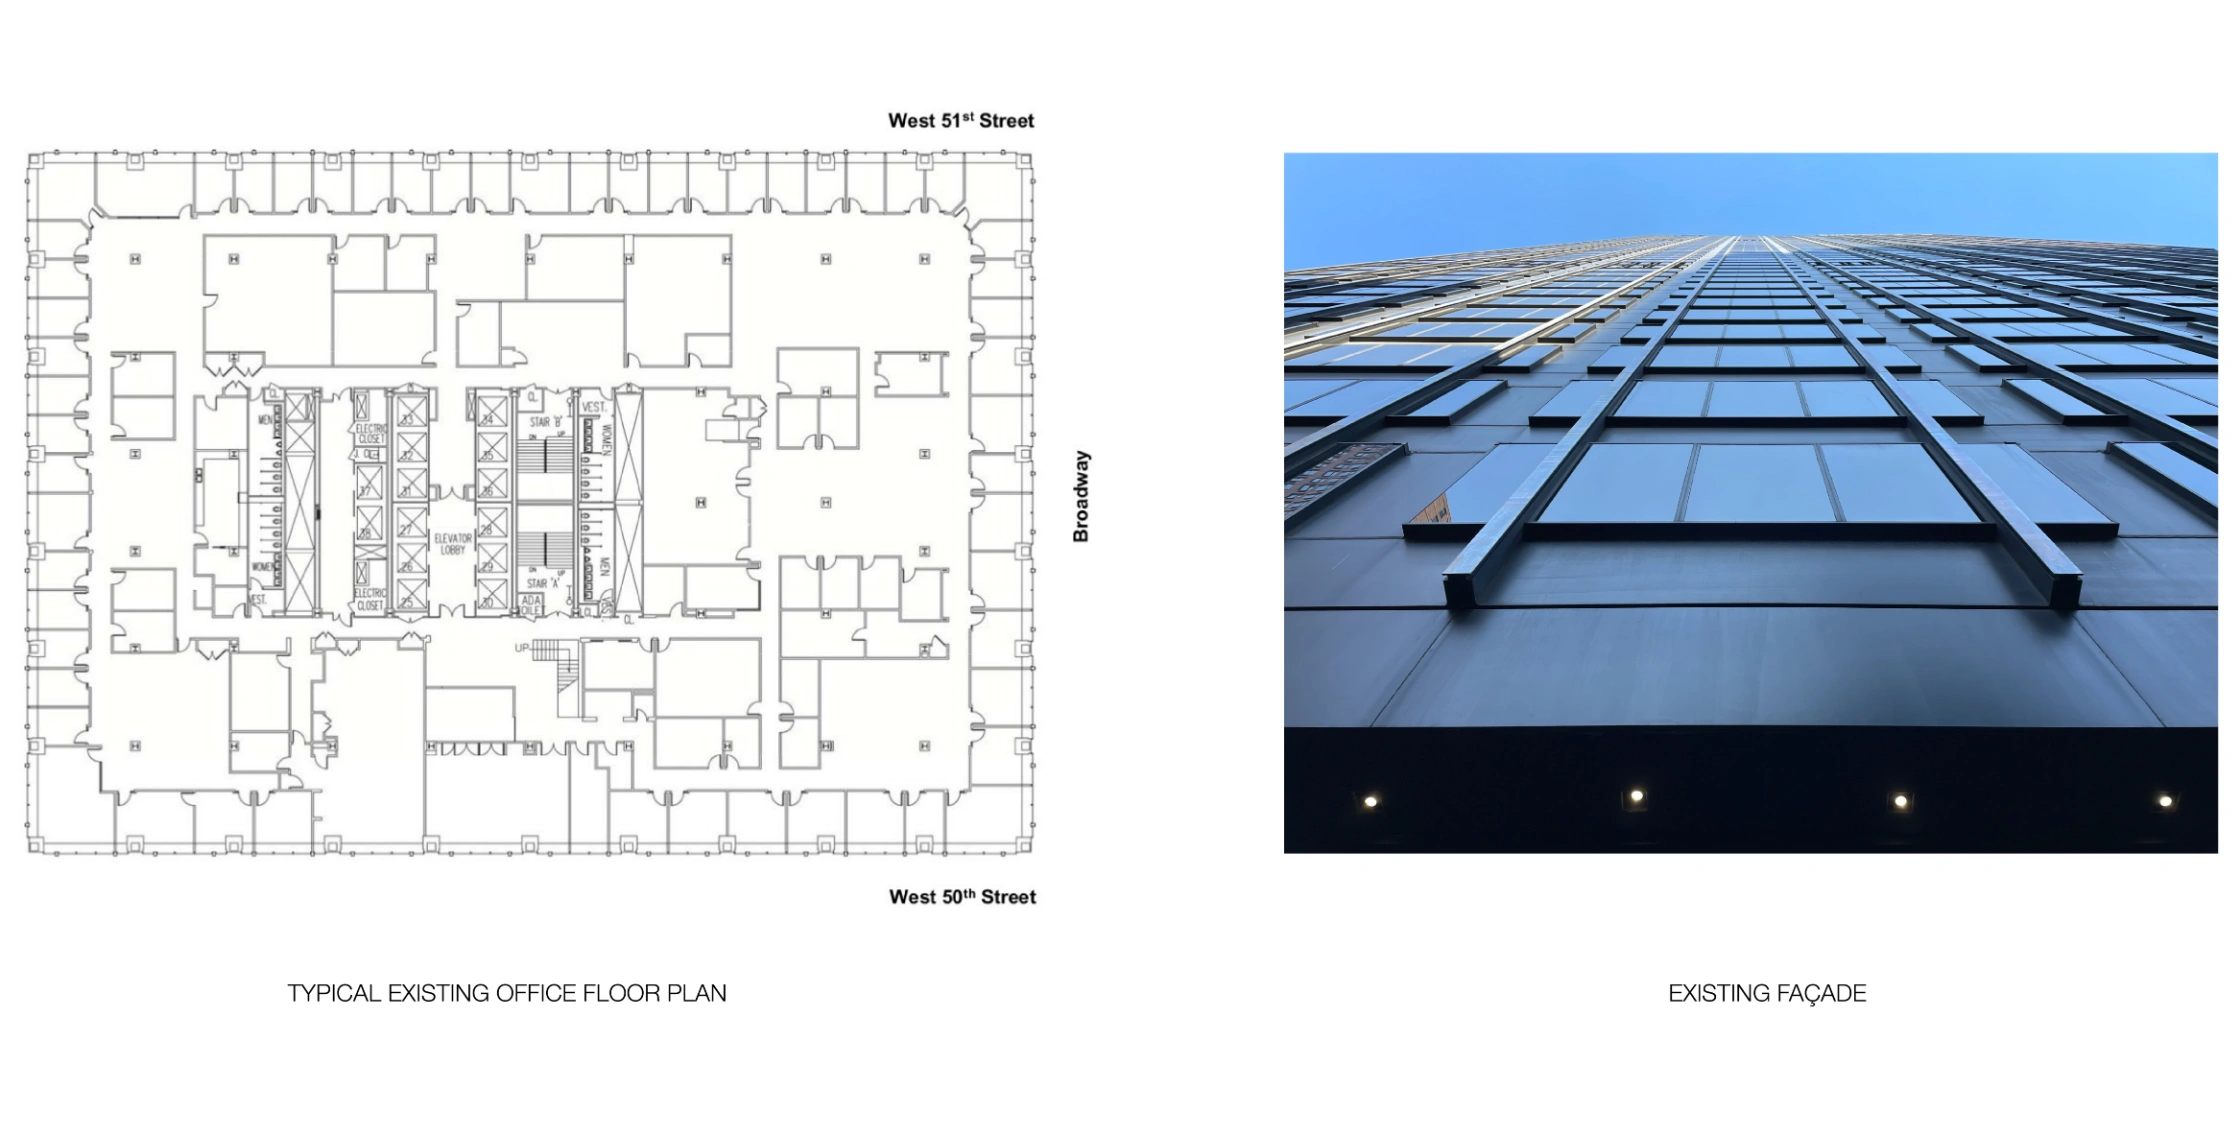 SCHORN_Office to resi - Existing plan and facade